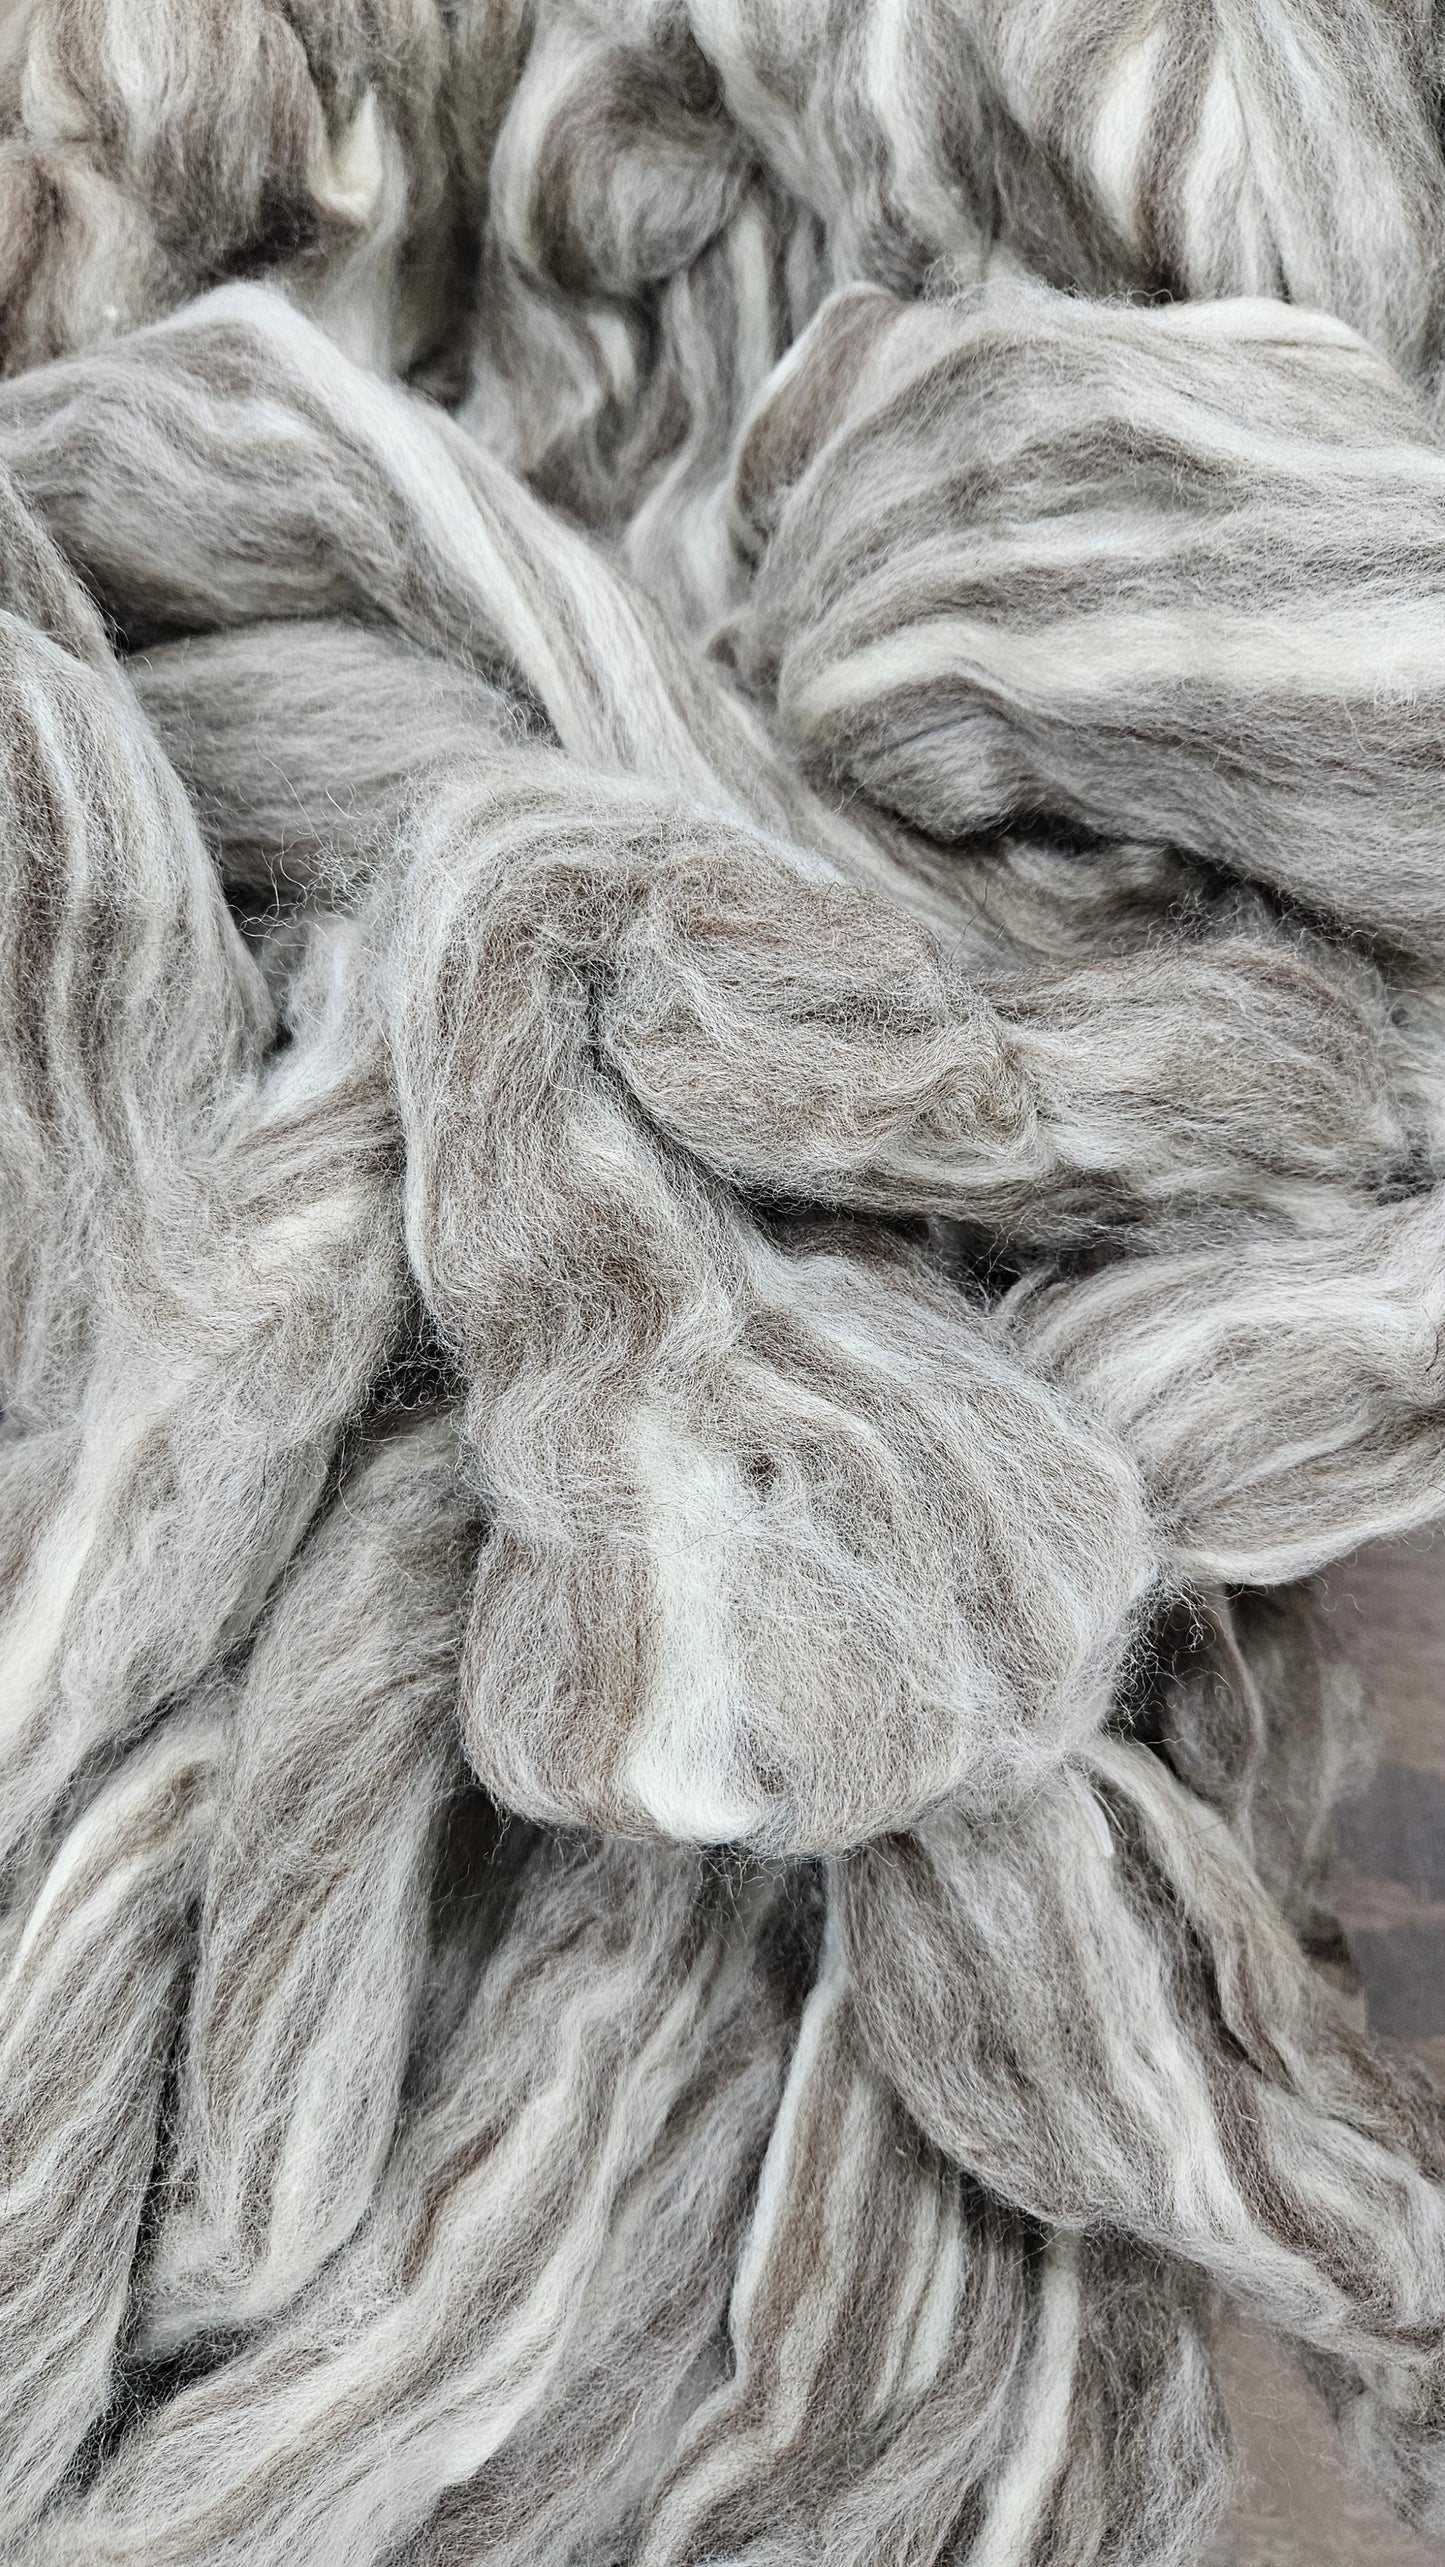 BLUE FACED LEICESTER (BFL) - Natural Wool Top Beginner Spinning Felting Carding Dyeing - 8 oz Grey White